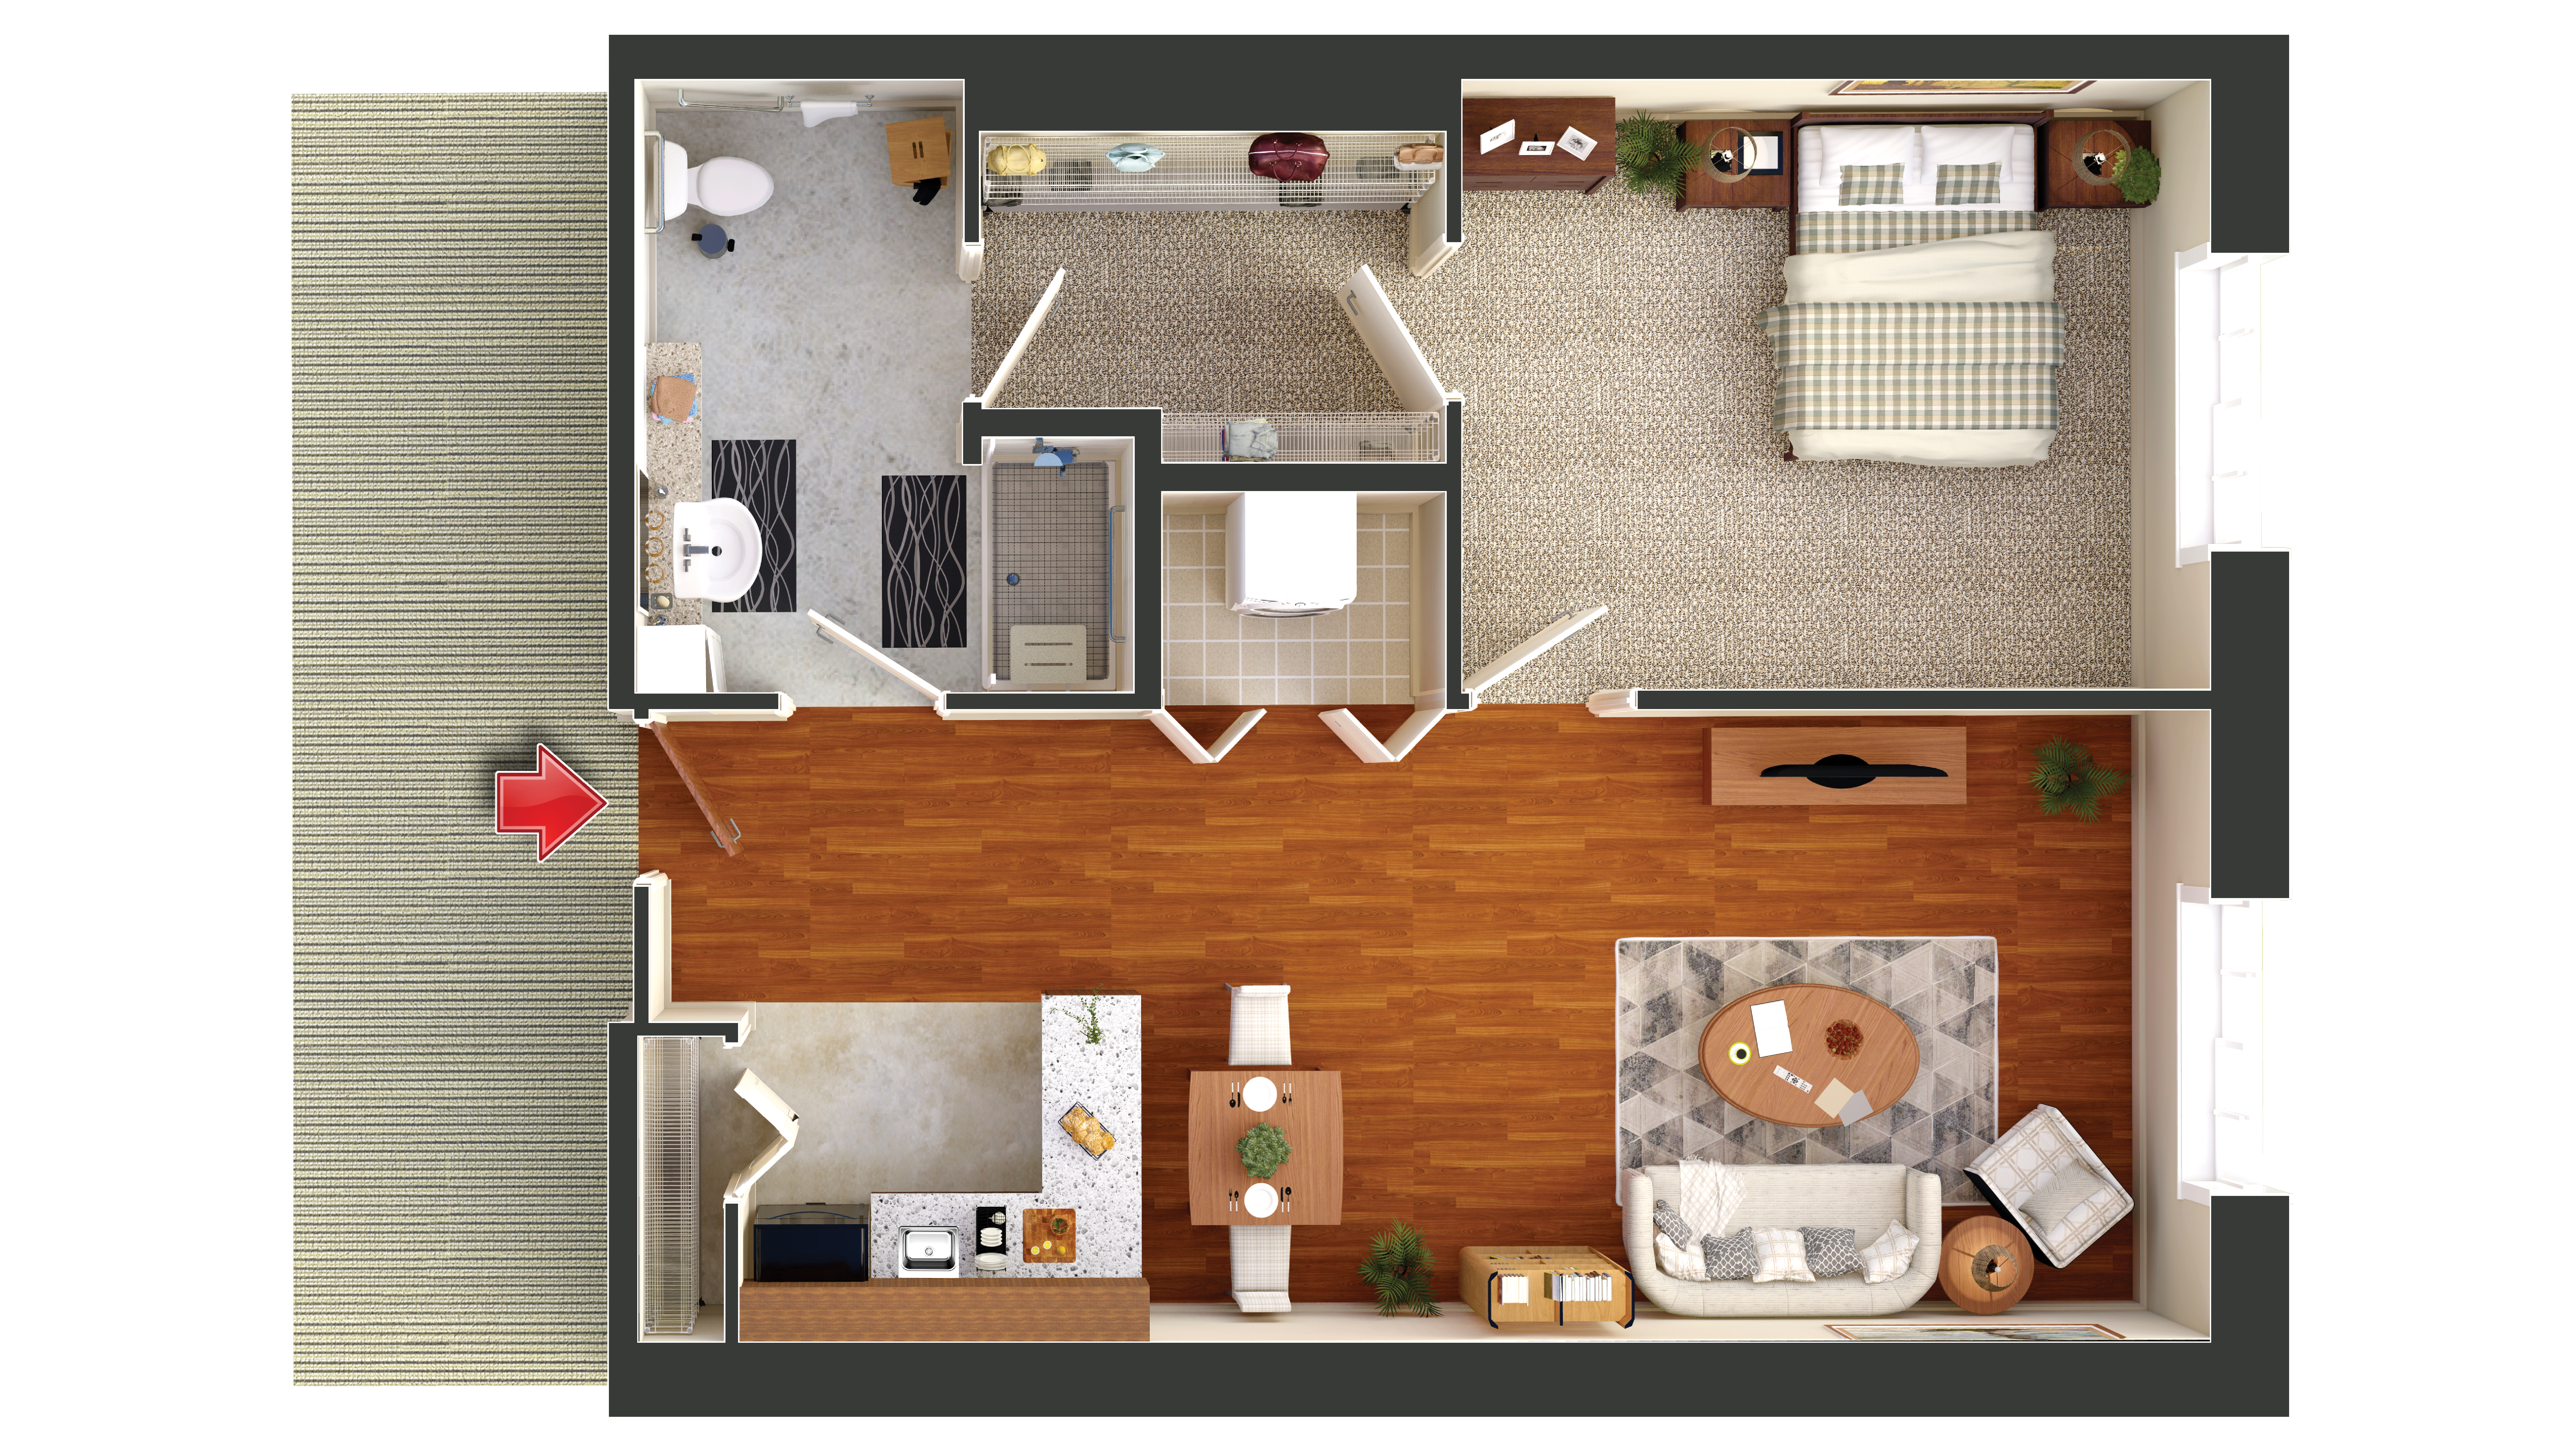 Becker one-bedroom apartment layout